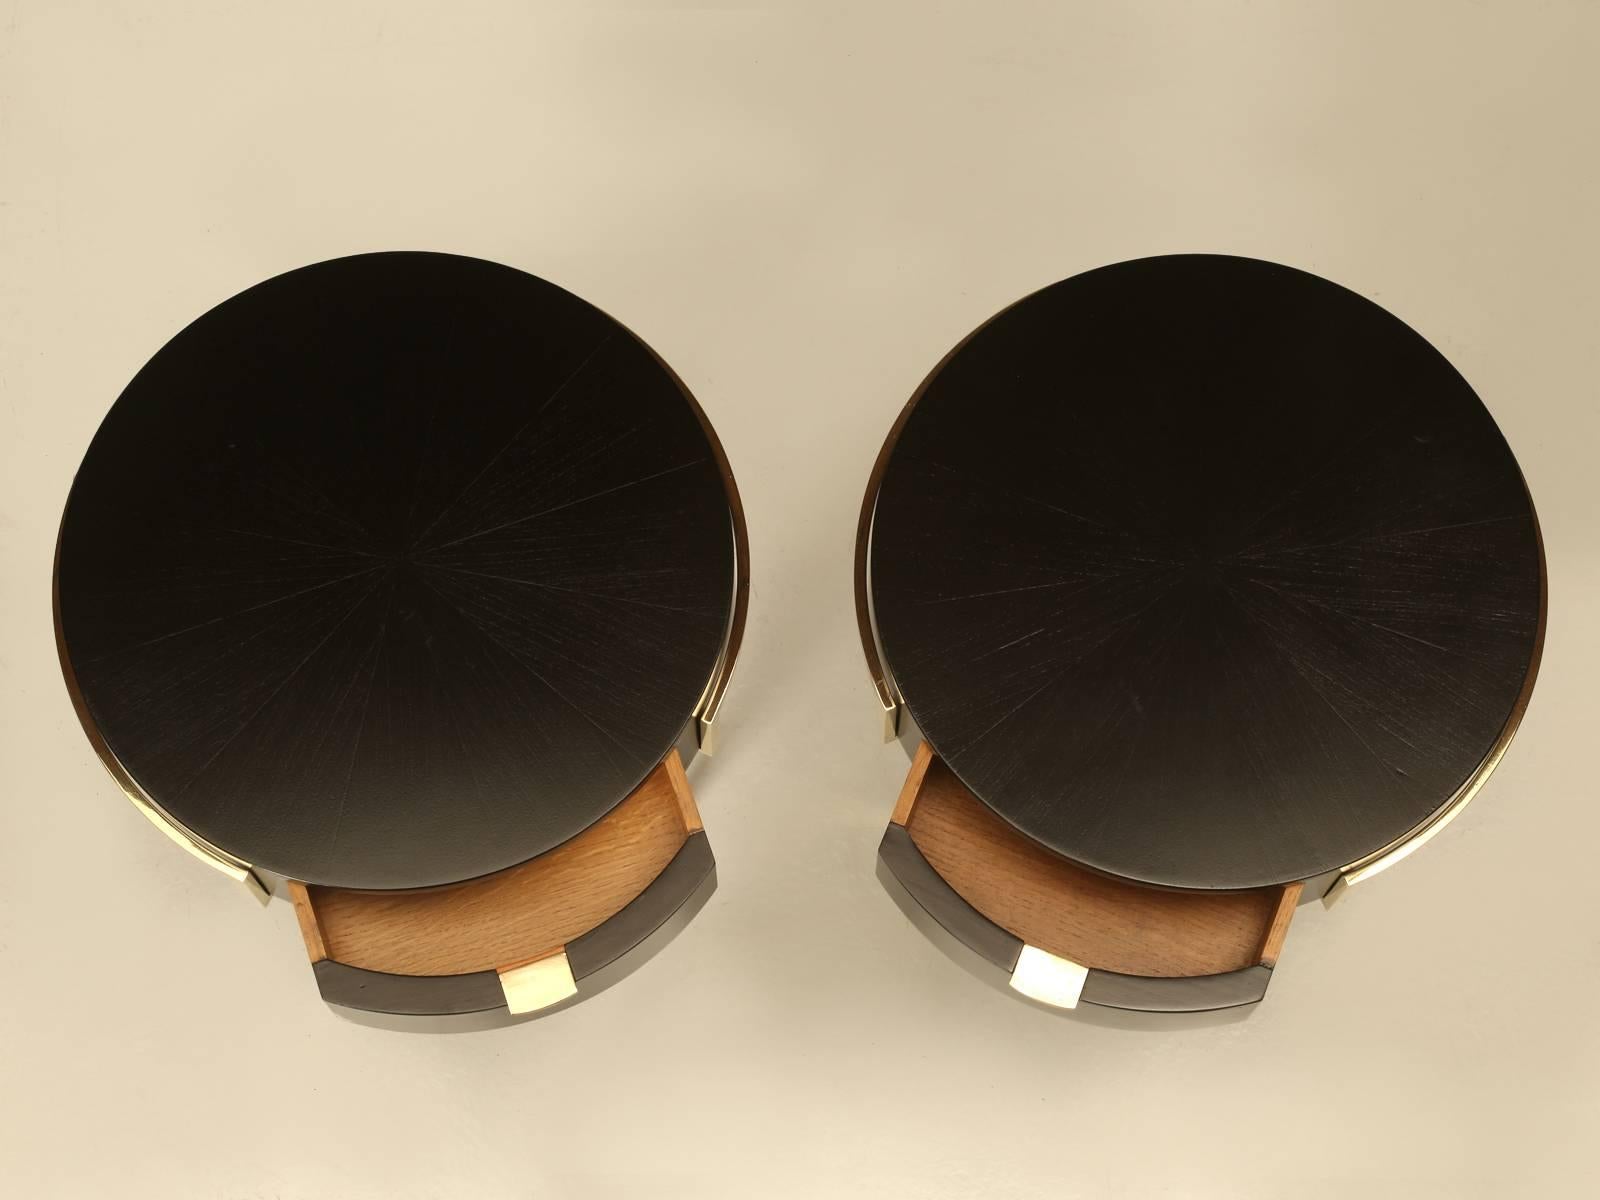 Pair of beautiful, very well executed ebonized Mid-Century Modern side tables with exquisite craftsmanship. Although purchased in France, these could easily be Italian or Scandinavian. The quality is quite something and most likely were made by a